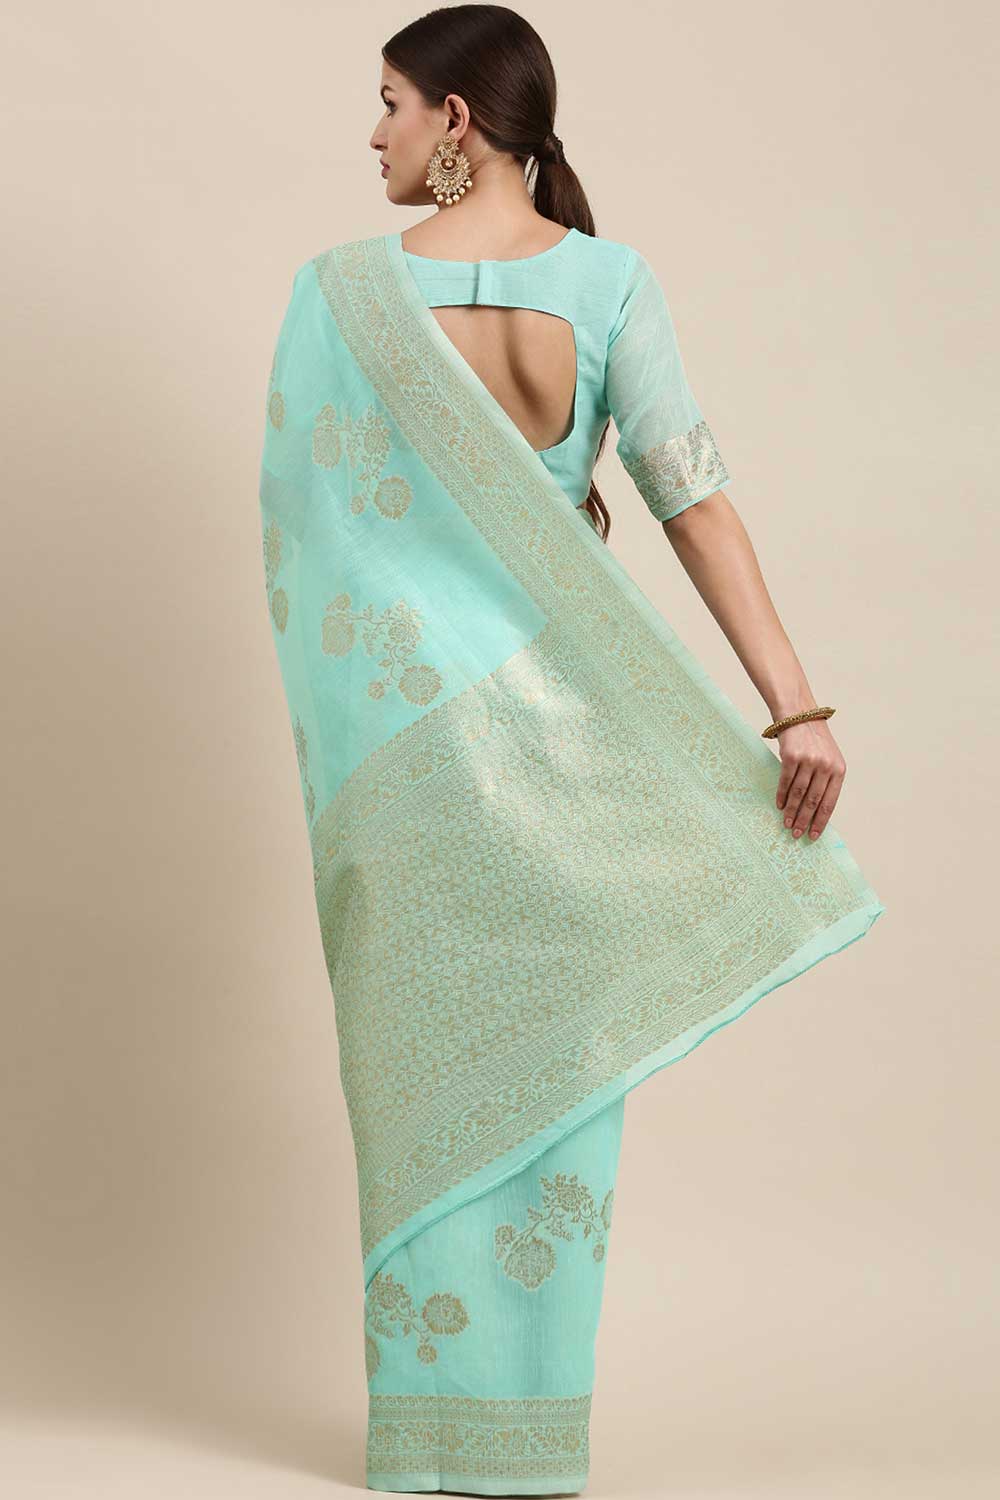 Shop Mogre Sea Green Floral Woven Blended Linen One Minute Saree at best offer at our  Store - One Minute Saree